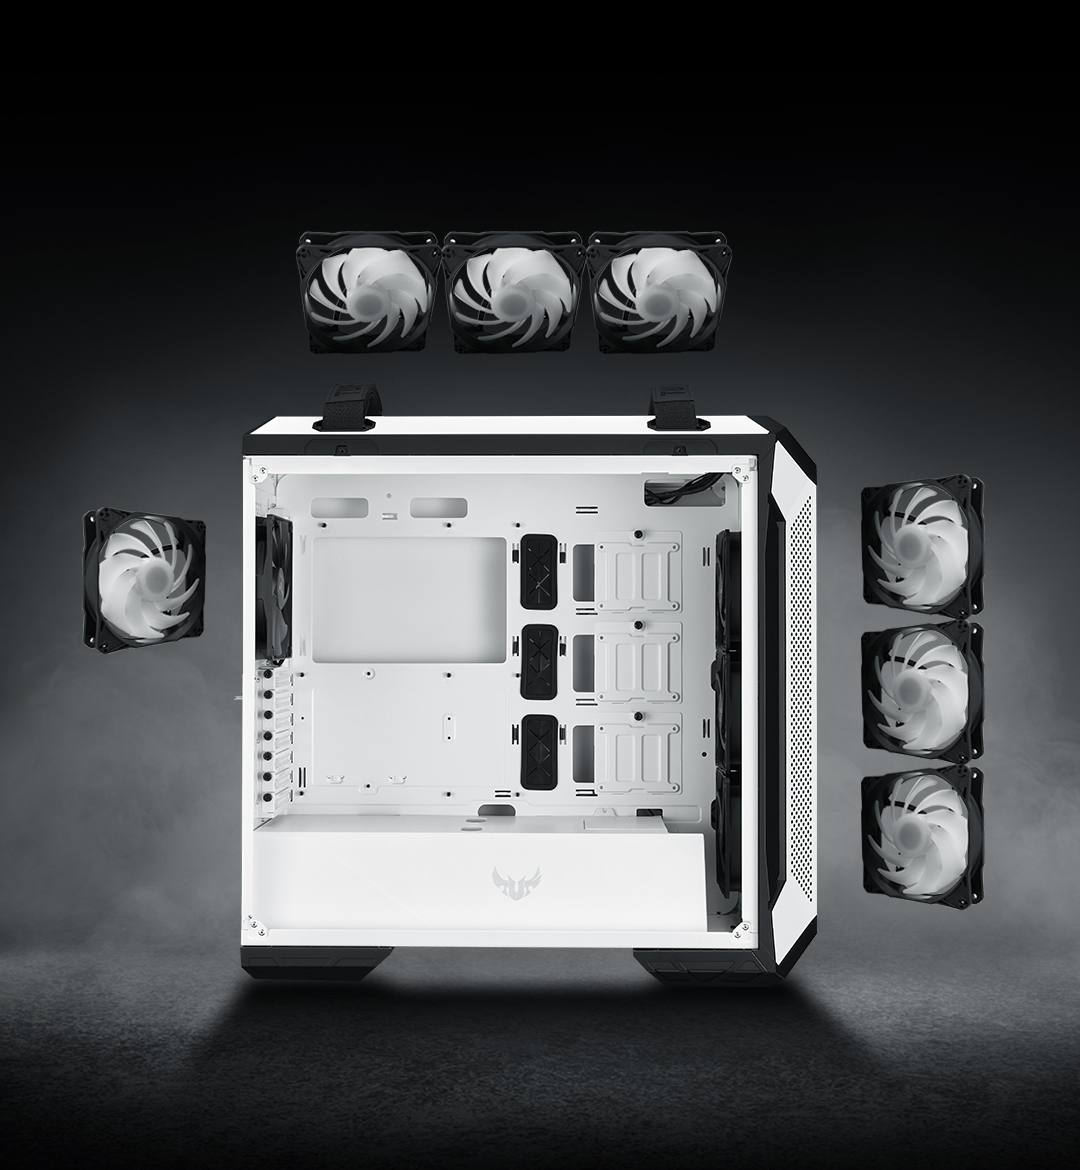 TUF Gaming GT501 white edition featuresseven cooling fans.